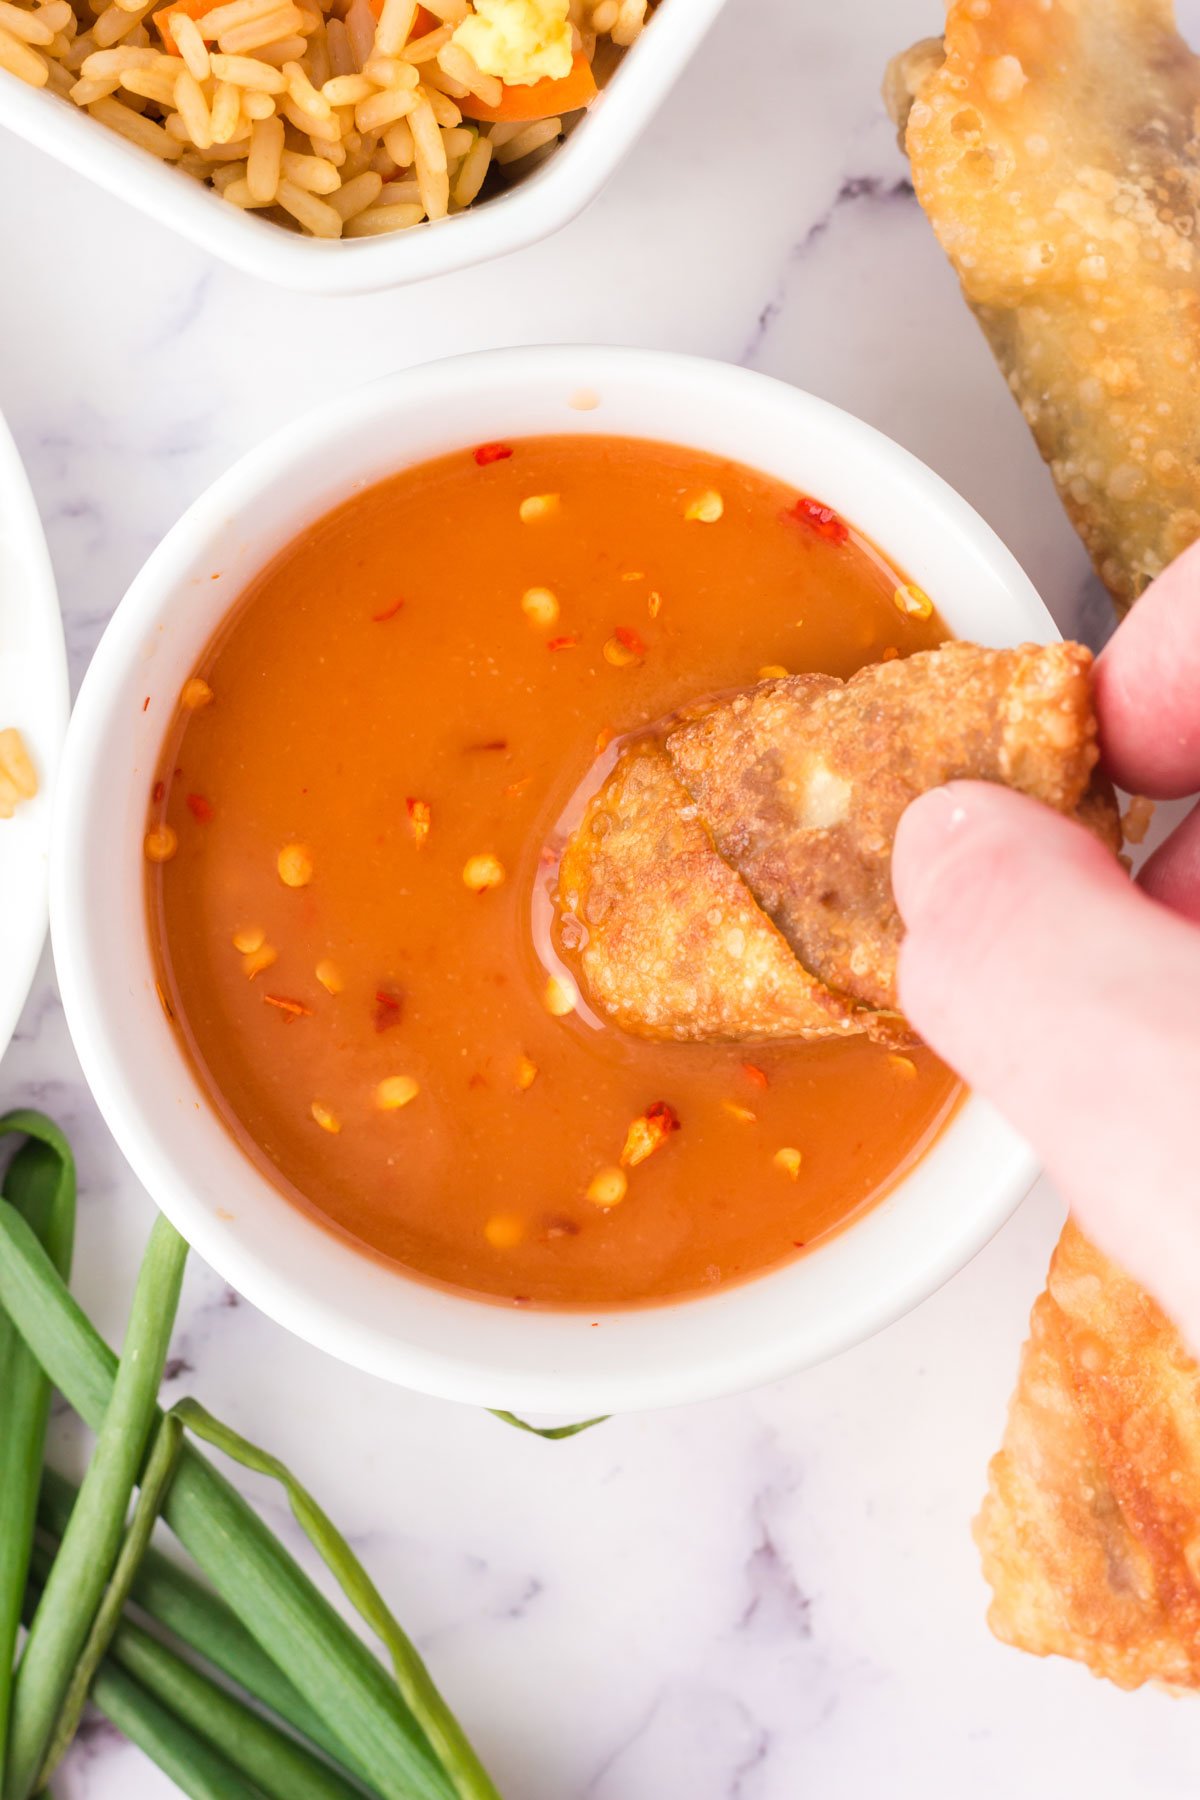 A hand is dipping a vegetable egg roll into a dish of sweet and sour sauce.